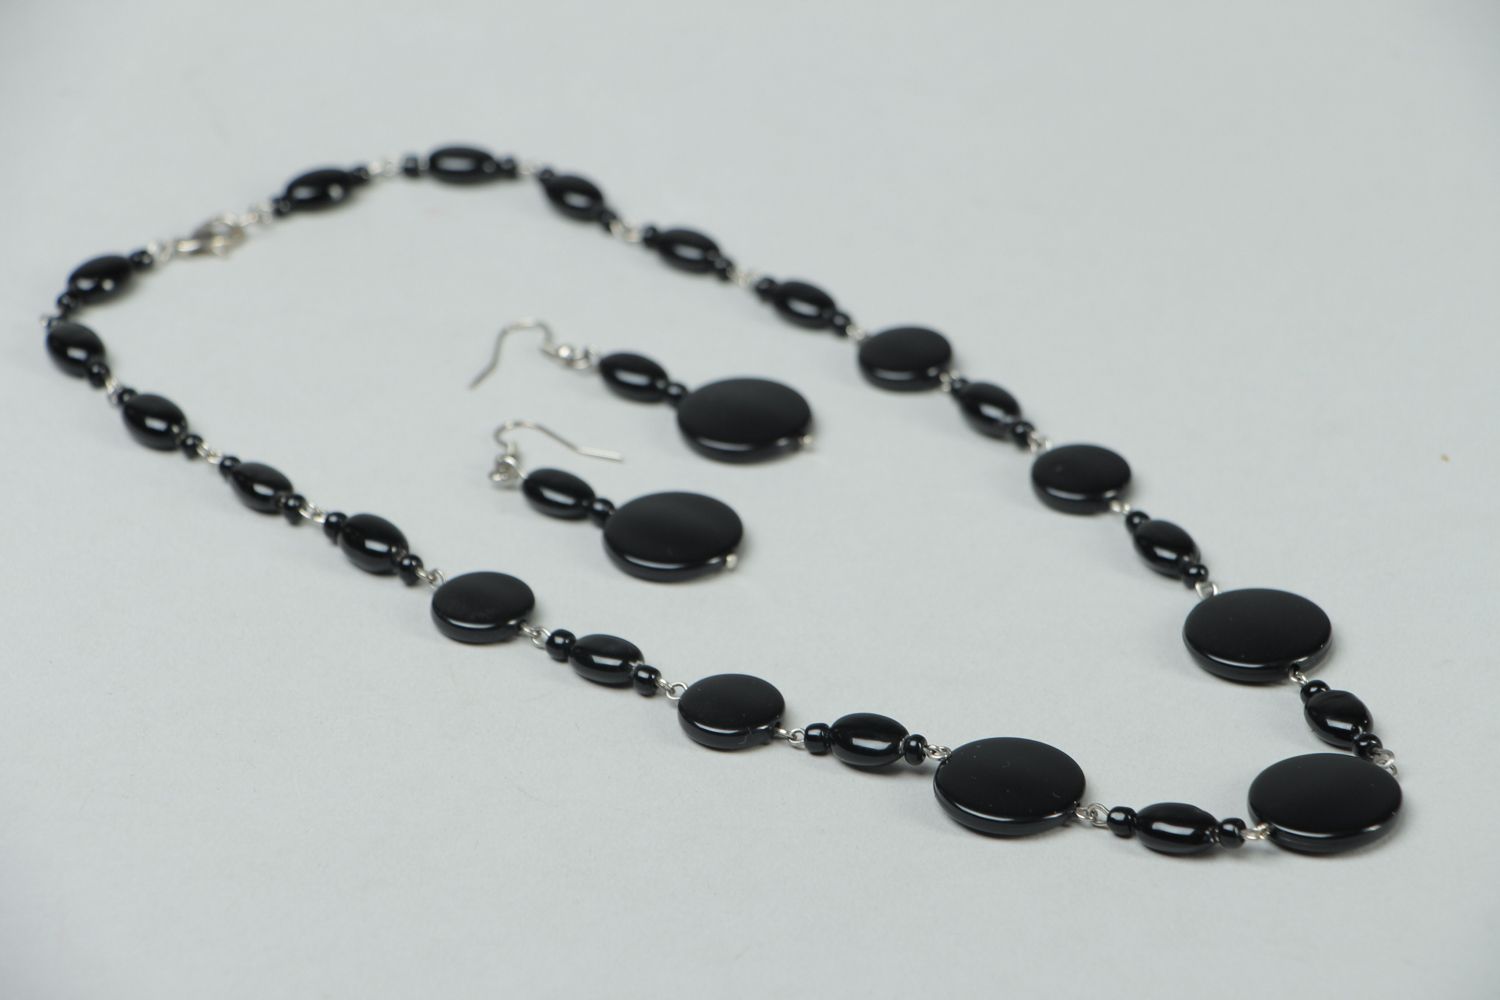 Black plastic jewelry earrings and bead necklace photo 3